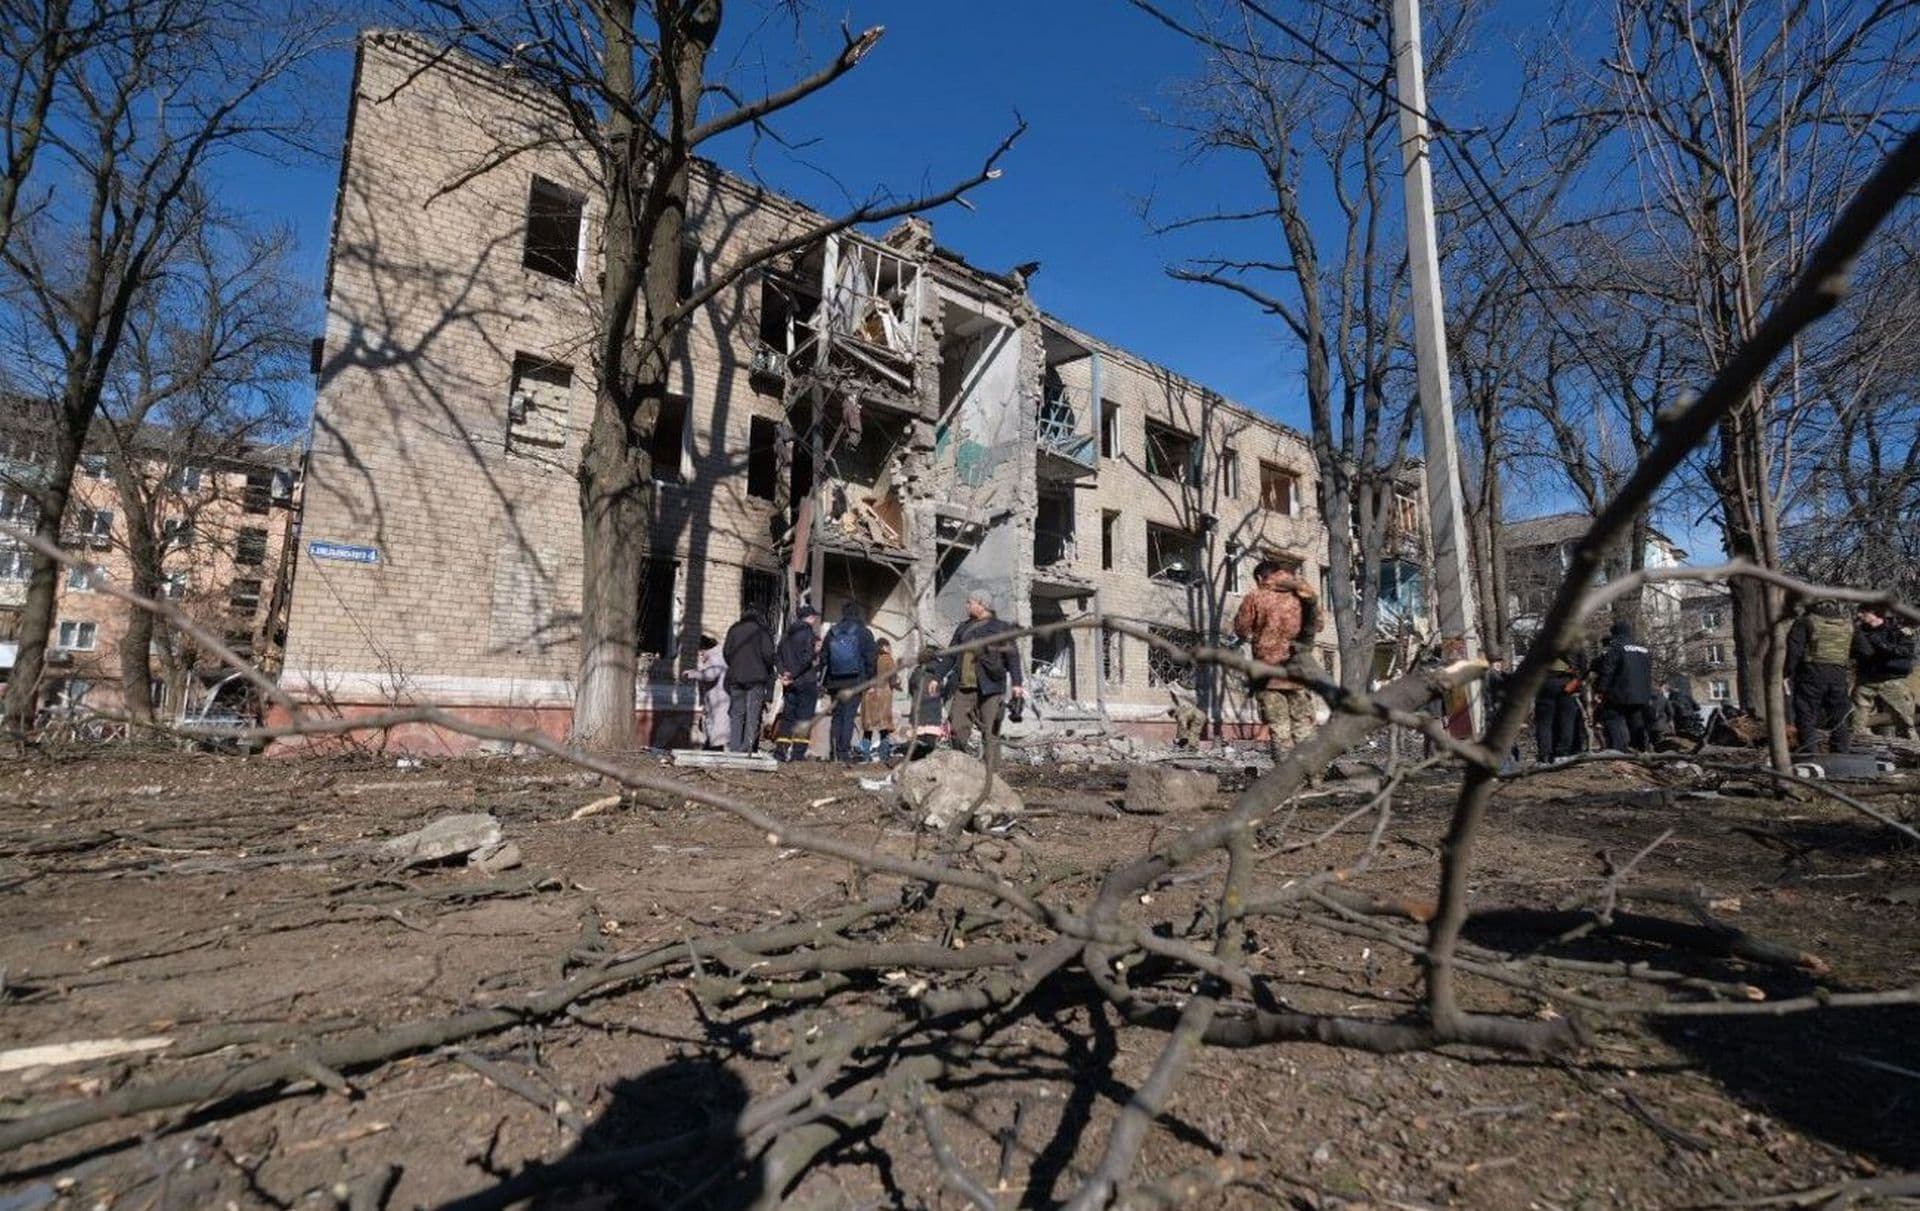 People attend the scene of a Russian missile strike on a residential building in Kramatorsk